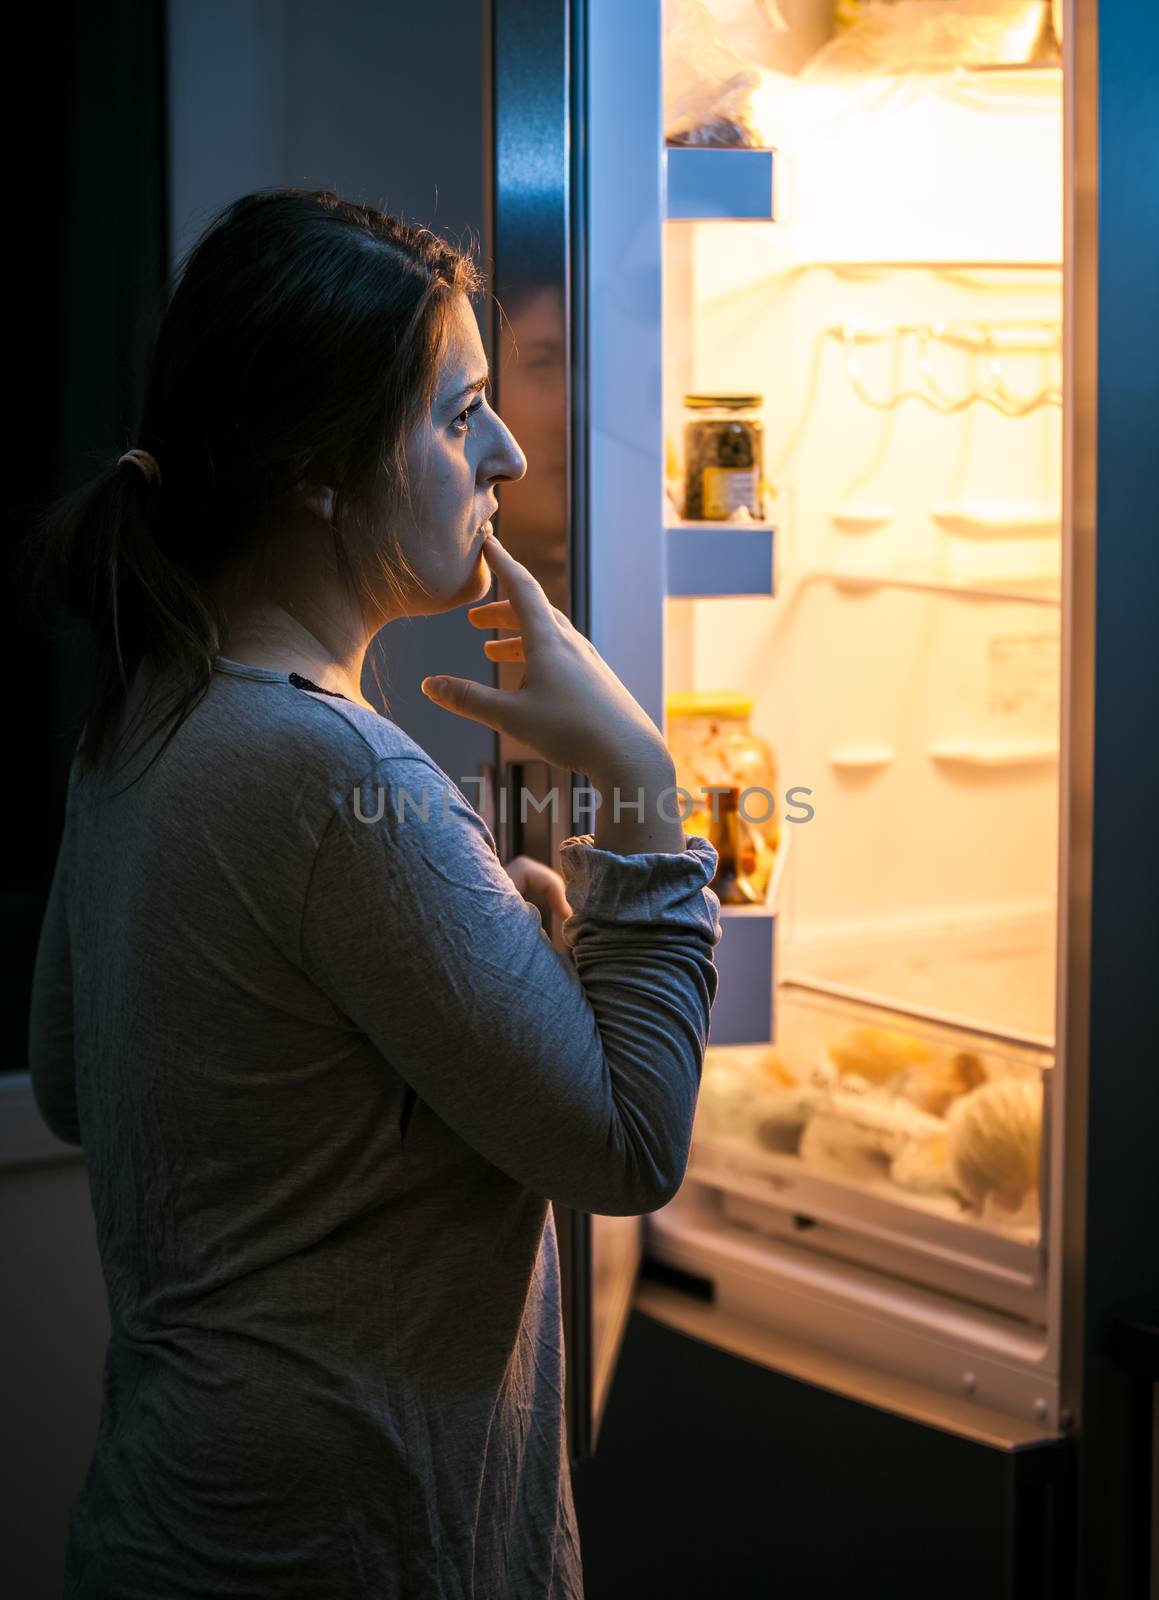 Young woman looking in the refrigerator at late evening